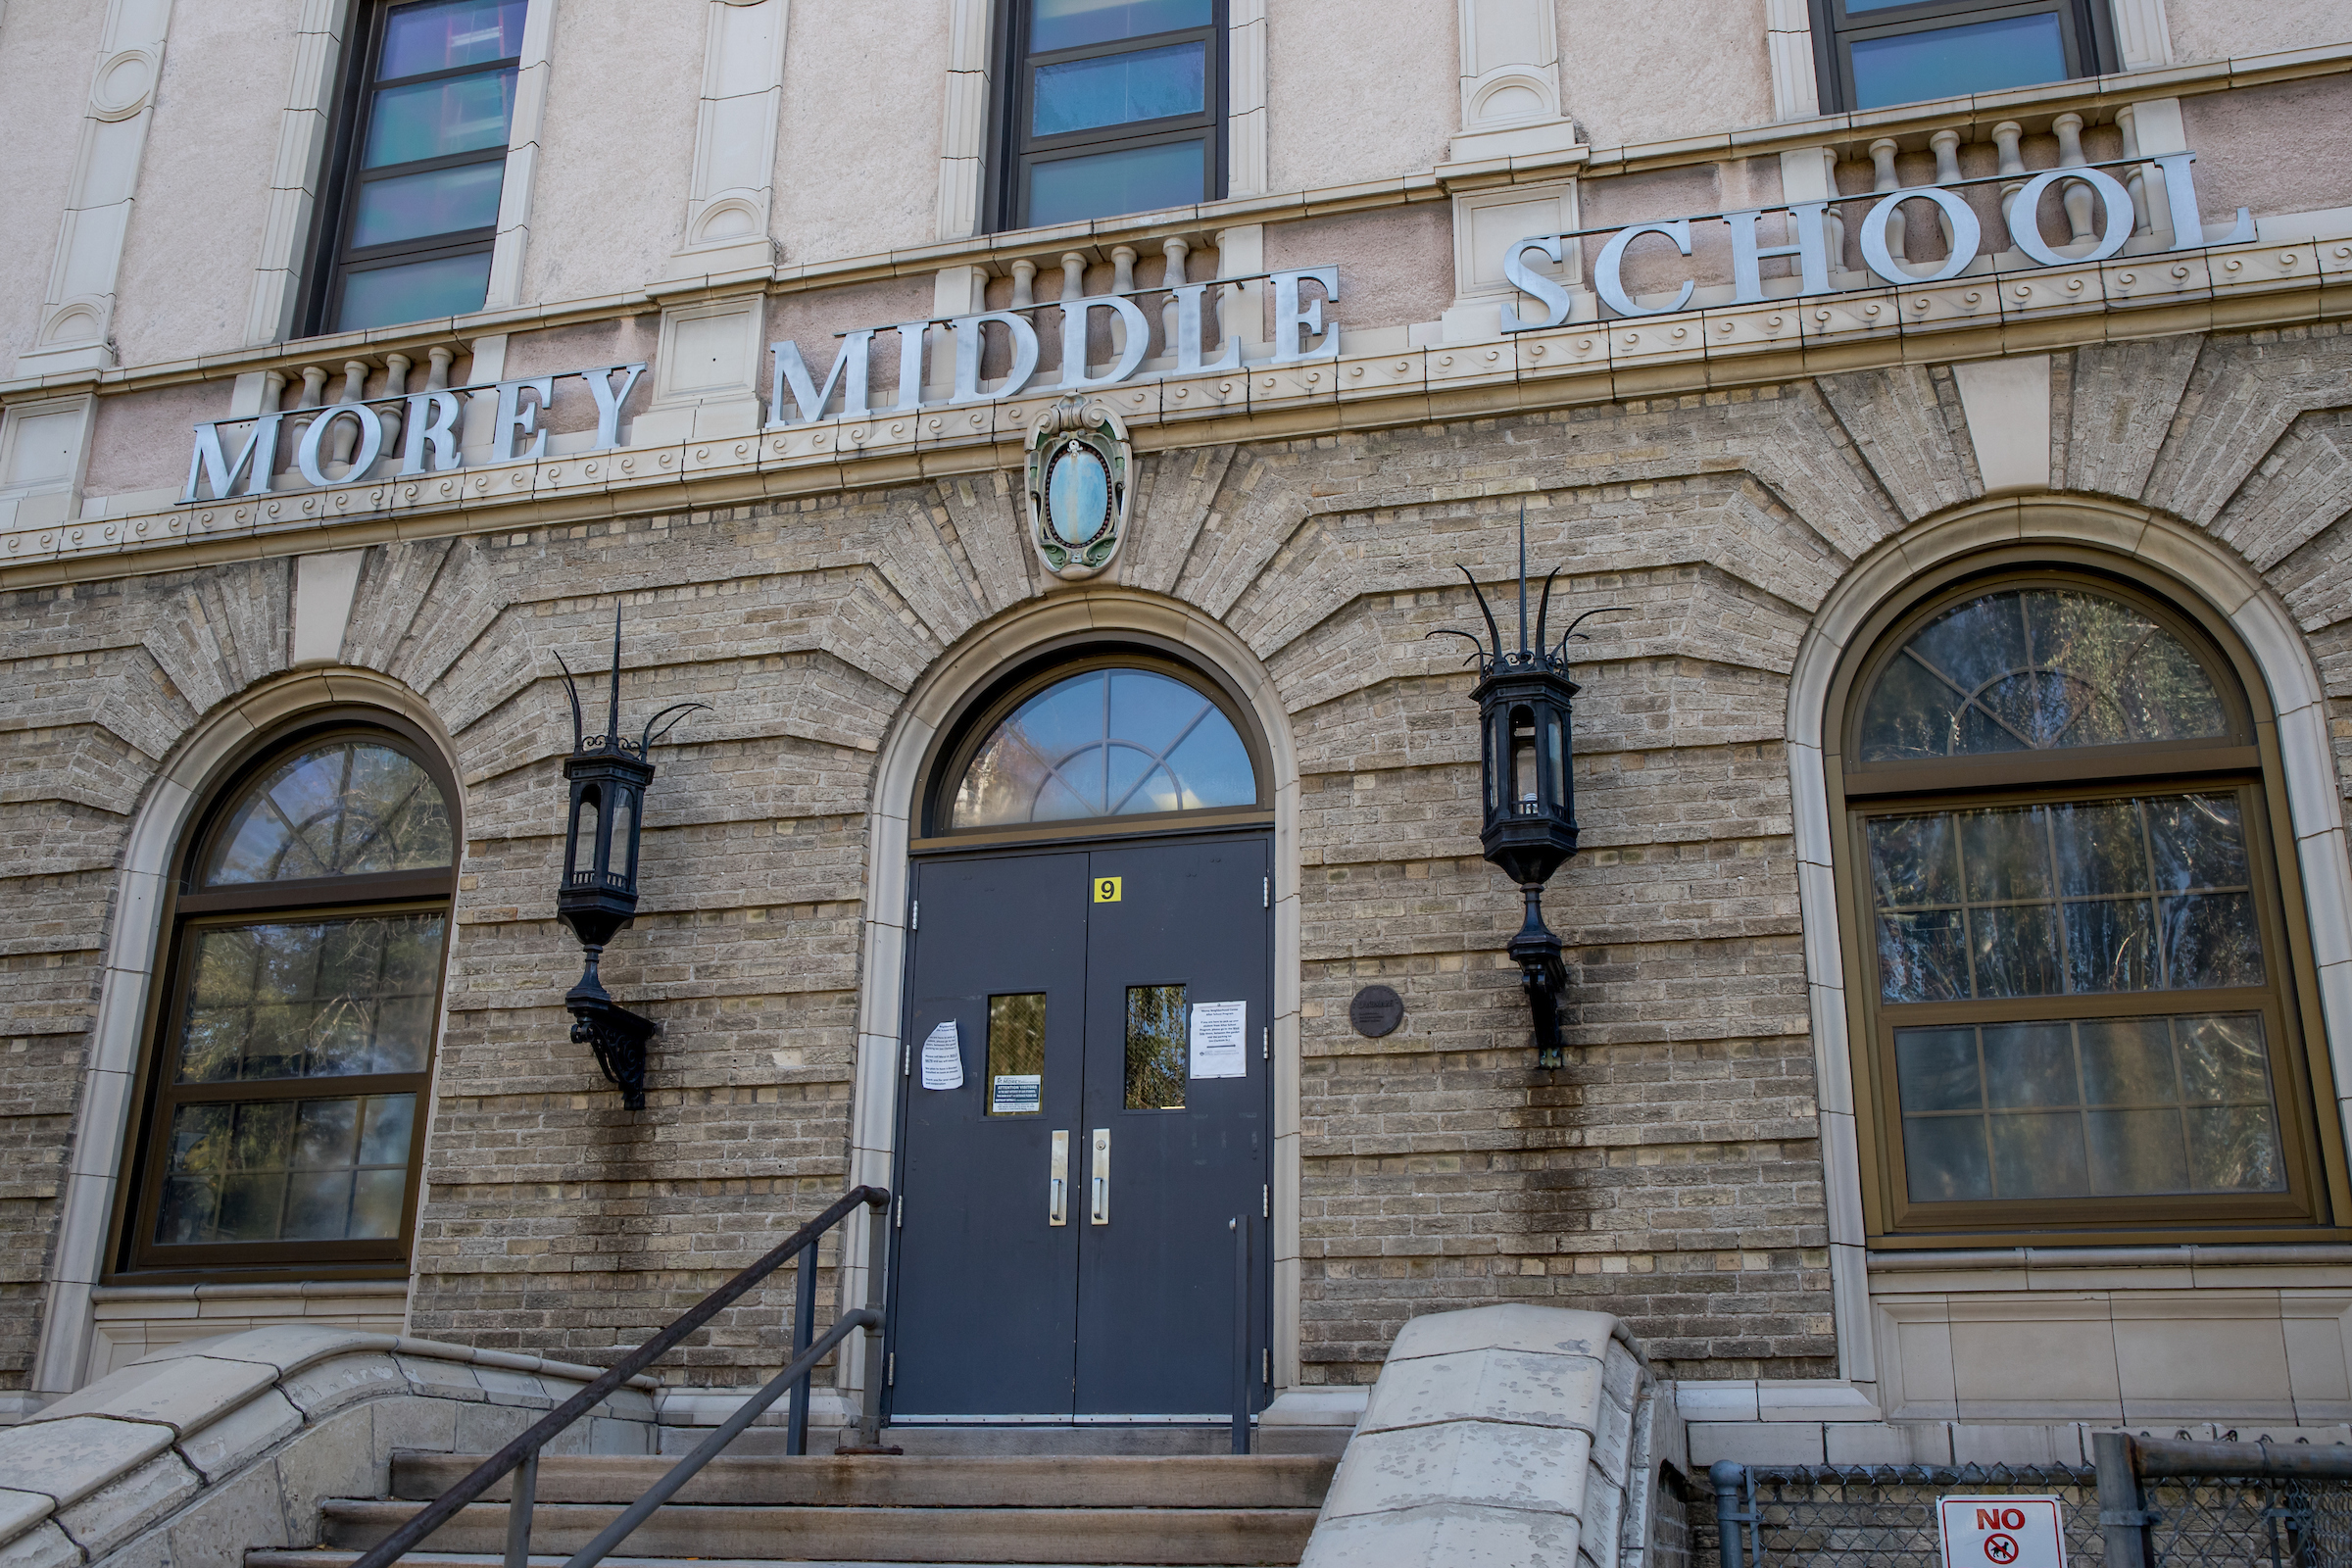 School photoshoot at Morey Middle School in September 2017